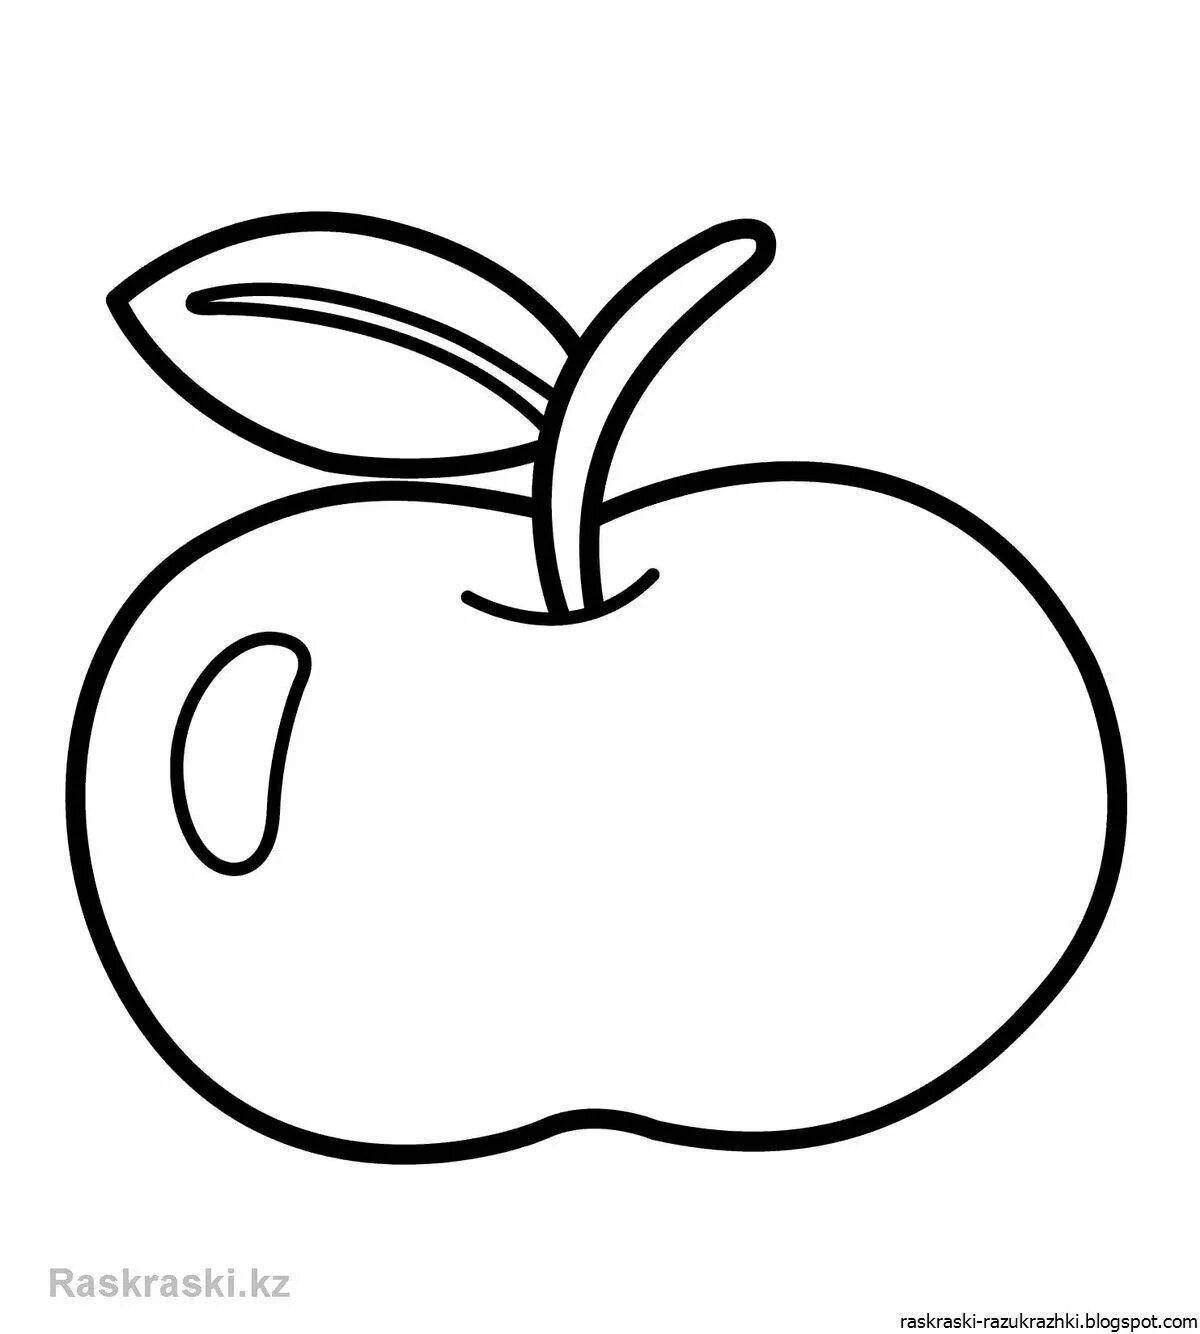 Cute fruits and vegetables coloring book